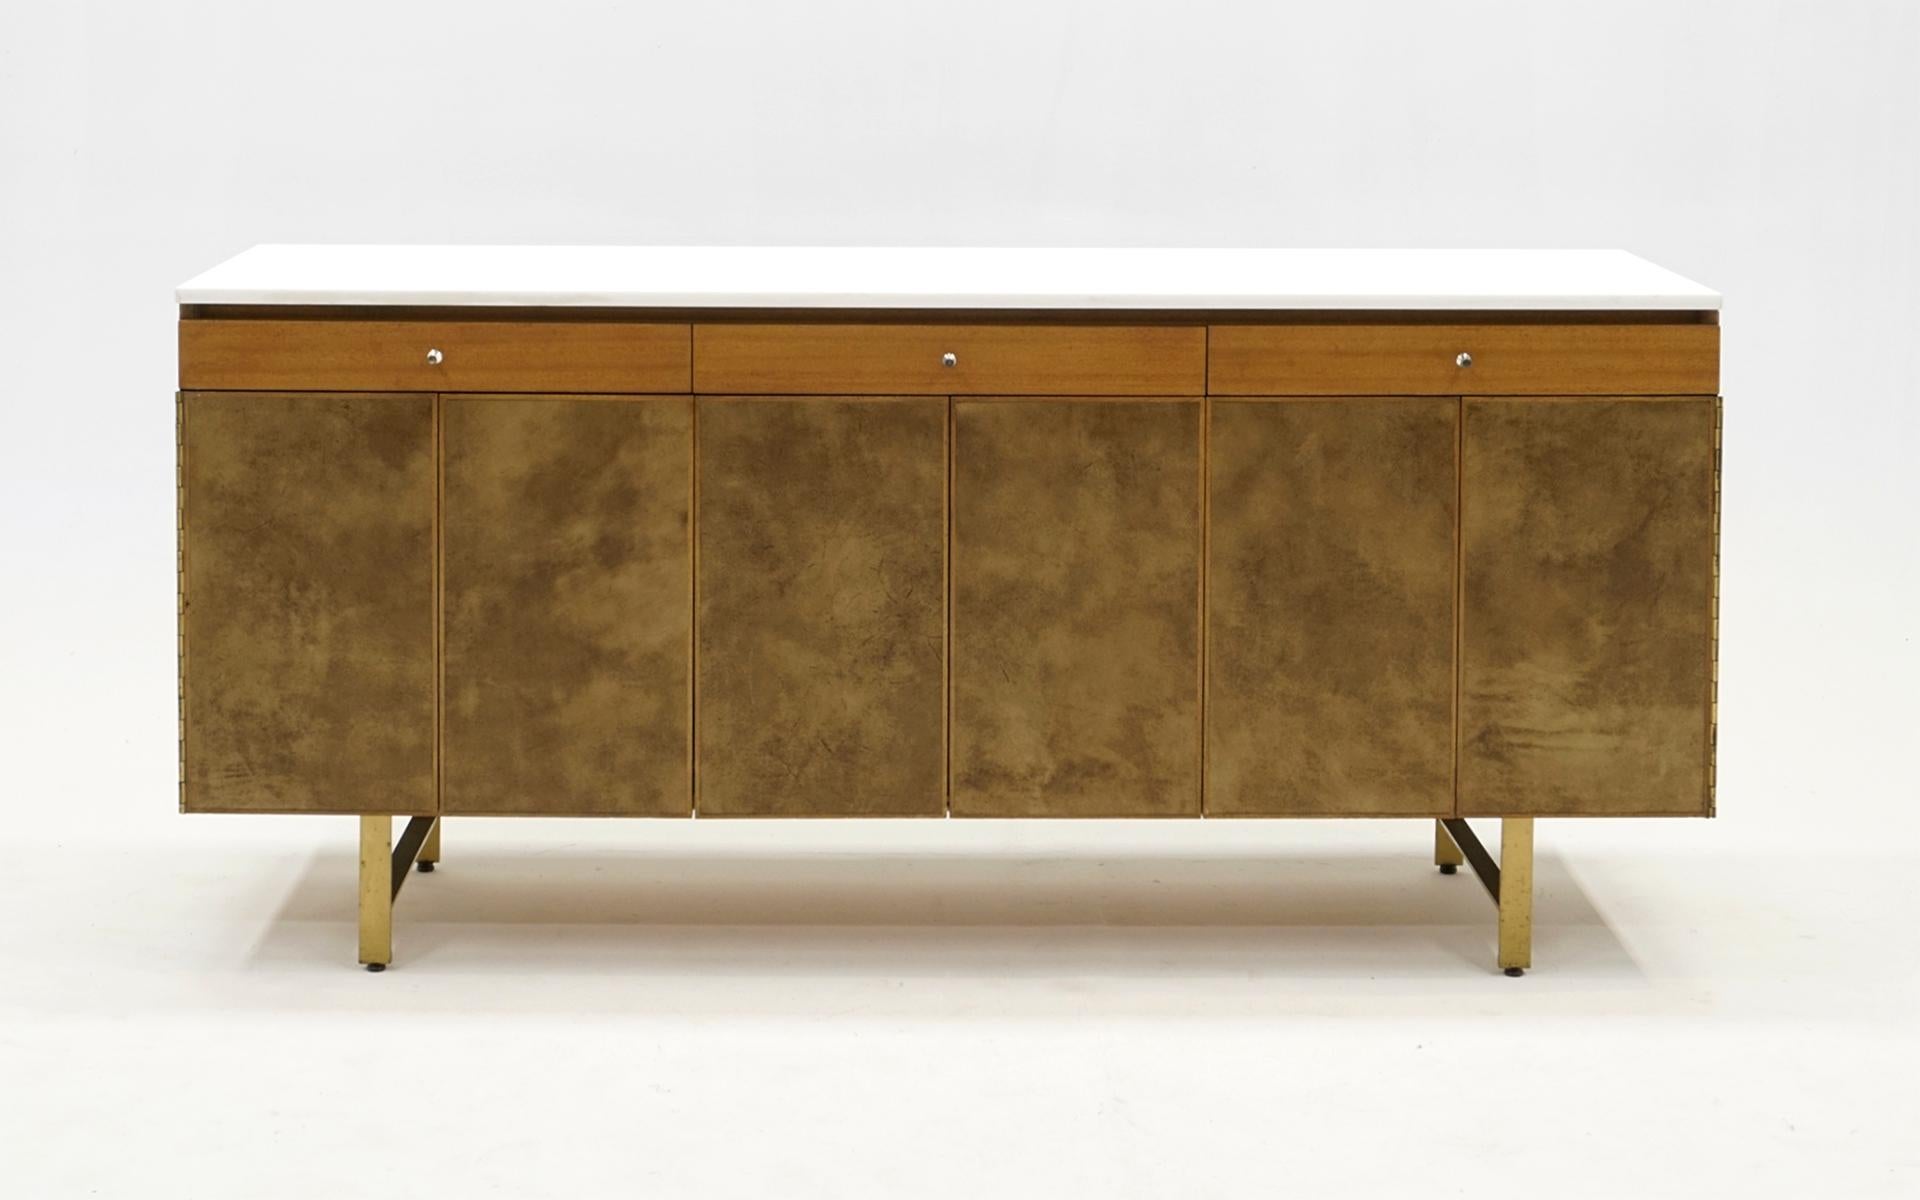 Credenza / sideboard / buffet / media cabinet designed by Paul McCobb for Calvin.  Mahogany case with three drawers, sturdy brass legs, leather covered trim-fold doors revealing adjustable shelves and a 1/2' thick milk glass / Vitrolite top.  This